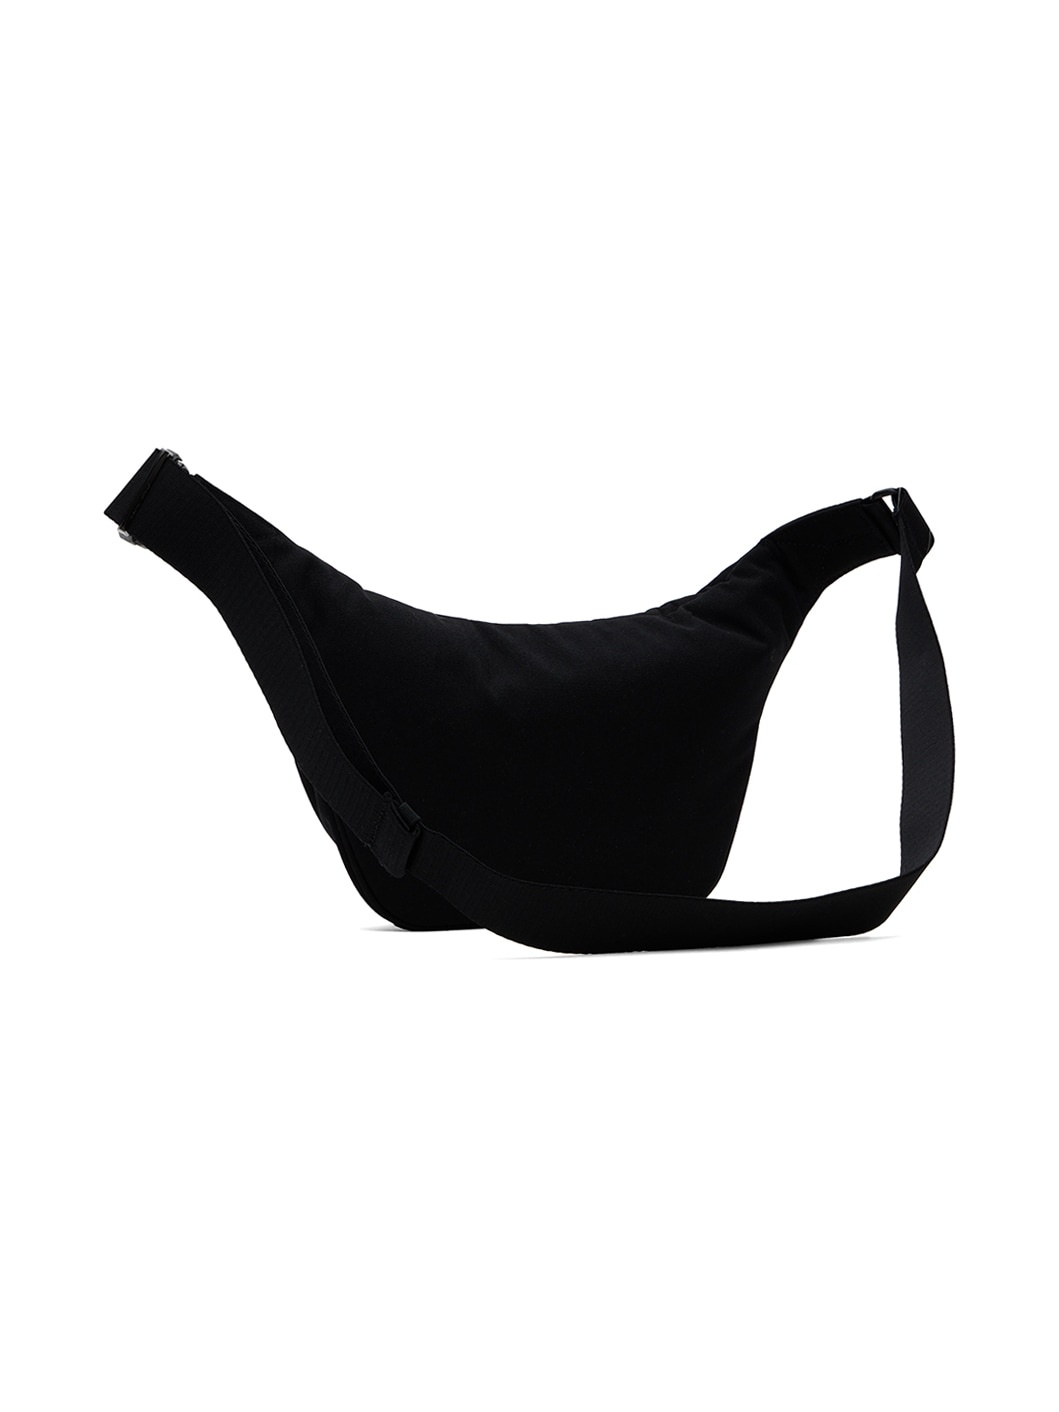 Black Morphed Pouch - 3